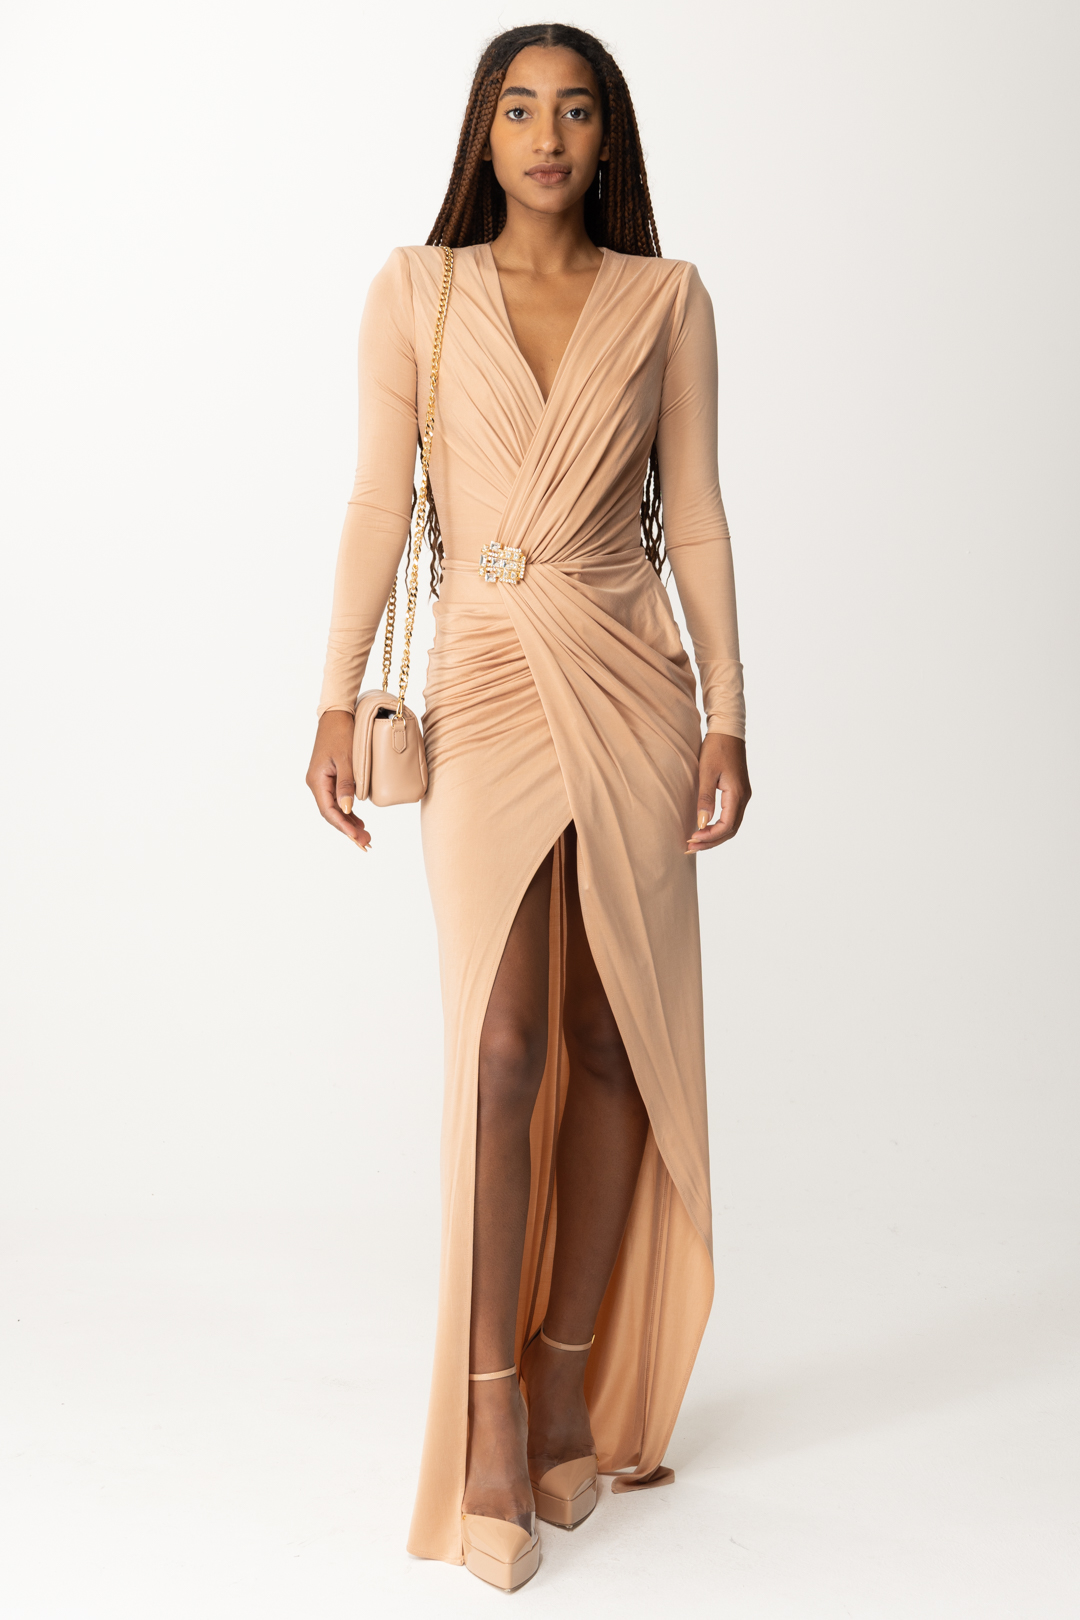 Preview: Elisabetta Franchi Cupro Red Carpet Dress with Jewel Closure SKIN